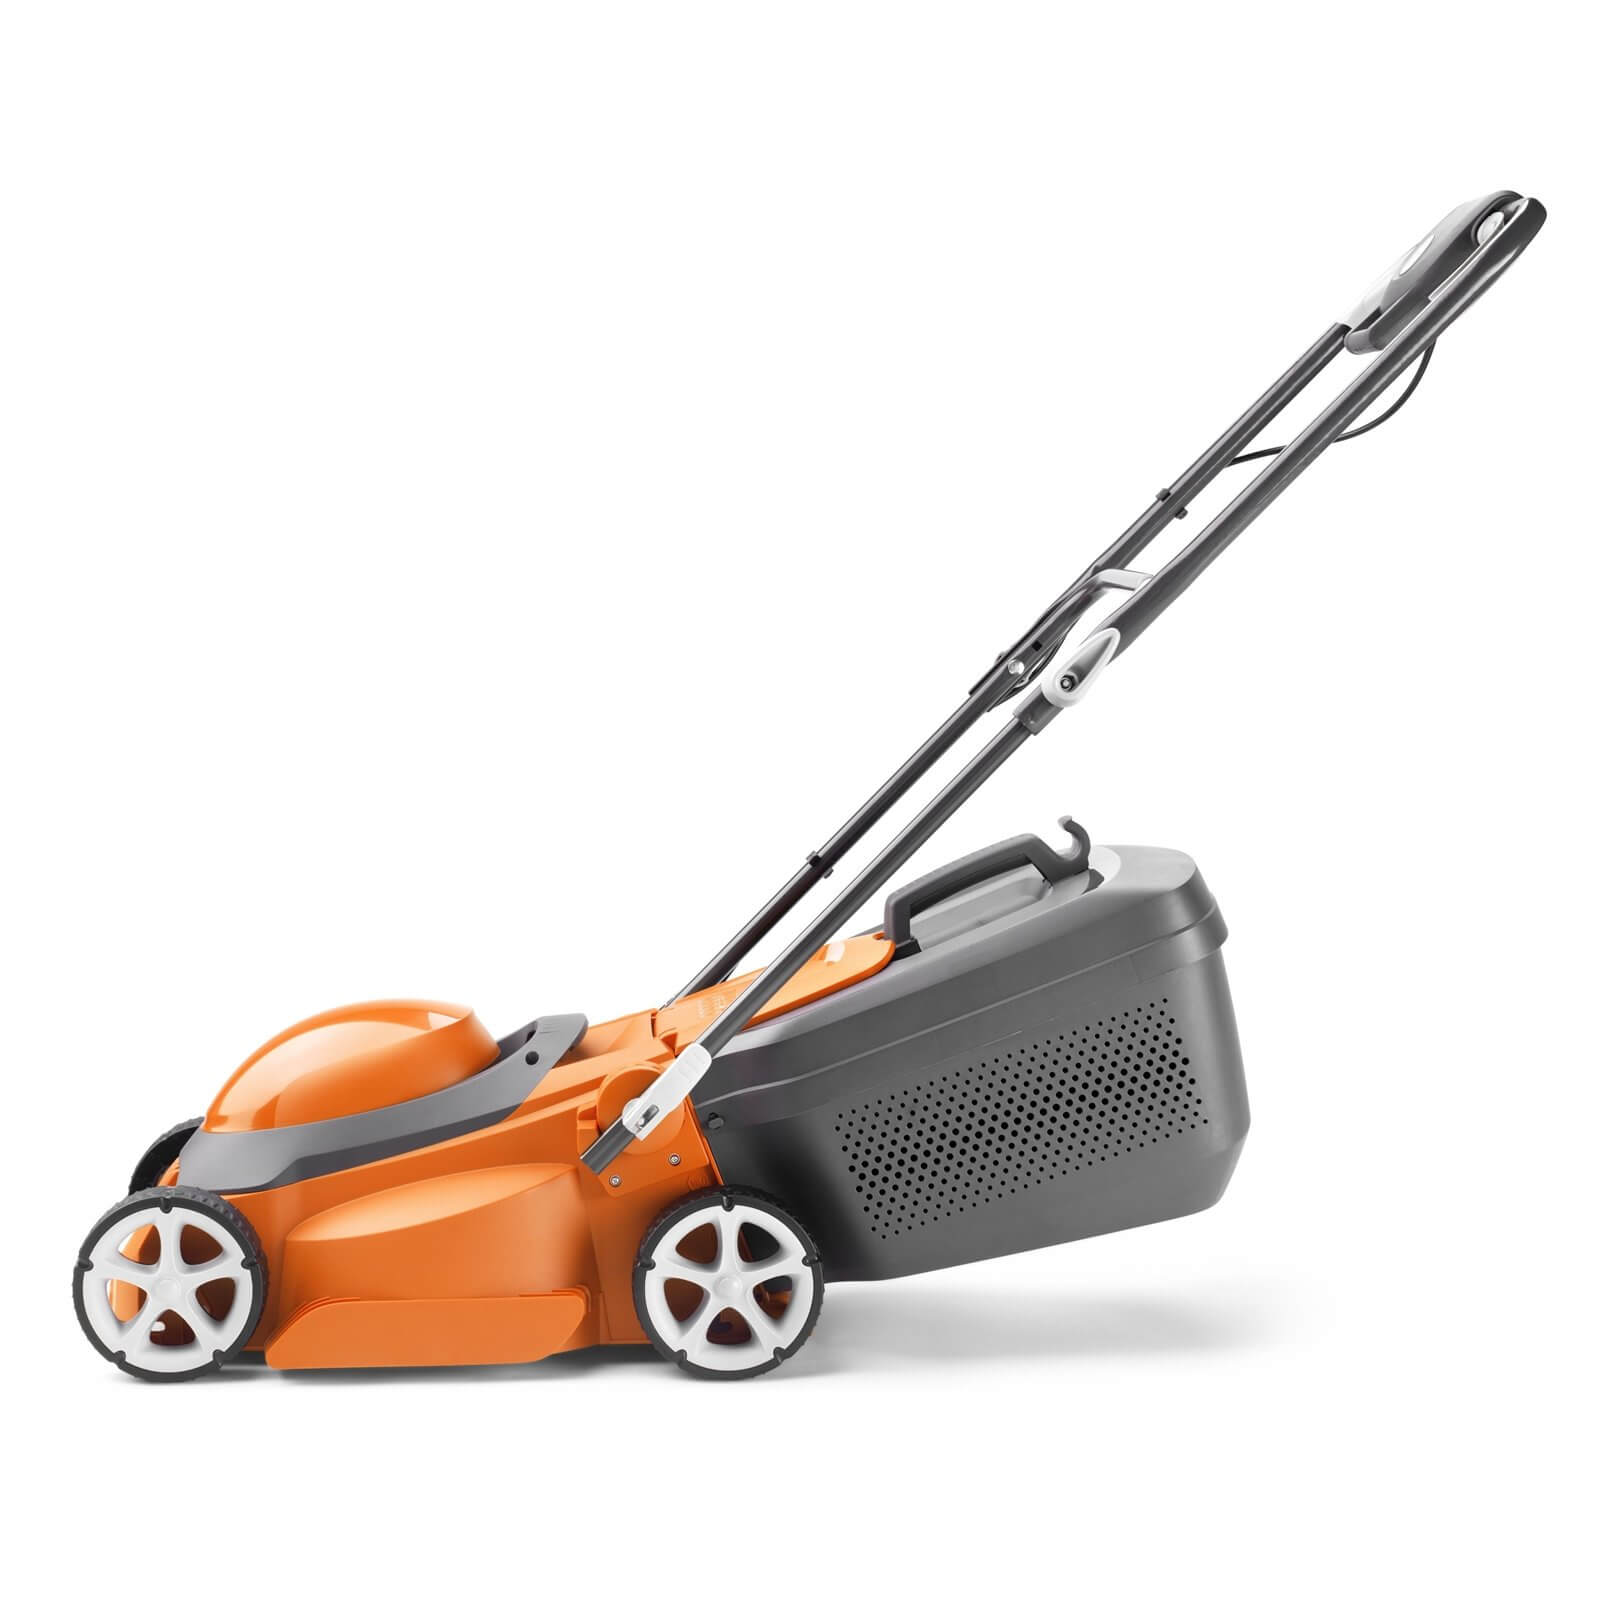 Easi Store 300R Electric Rotary Lawnmower